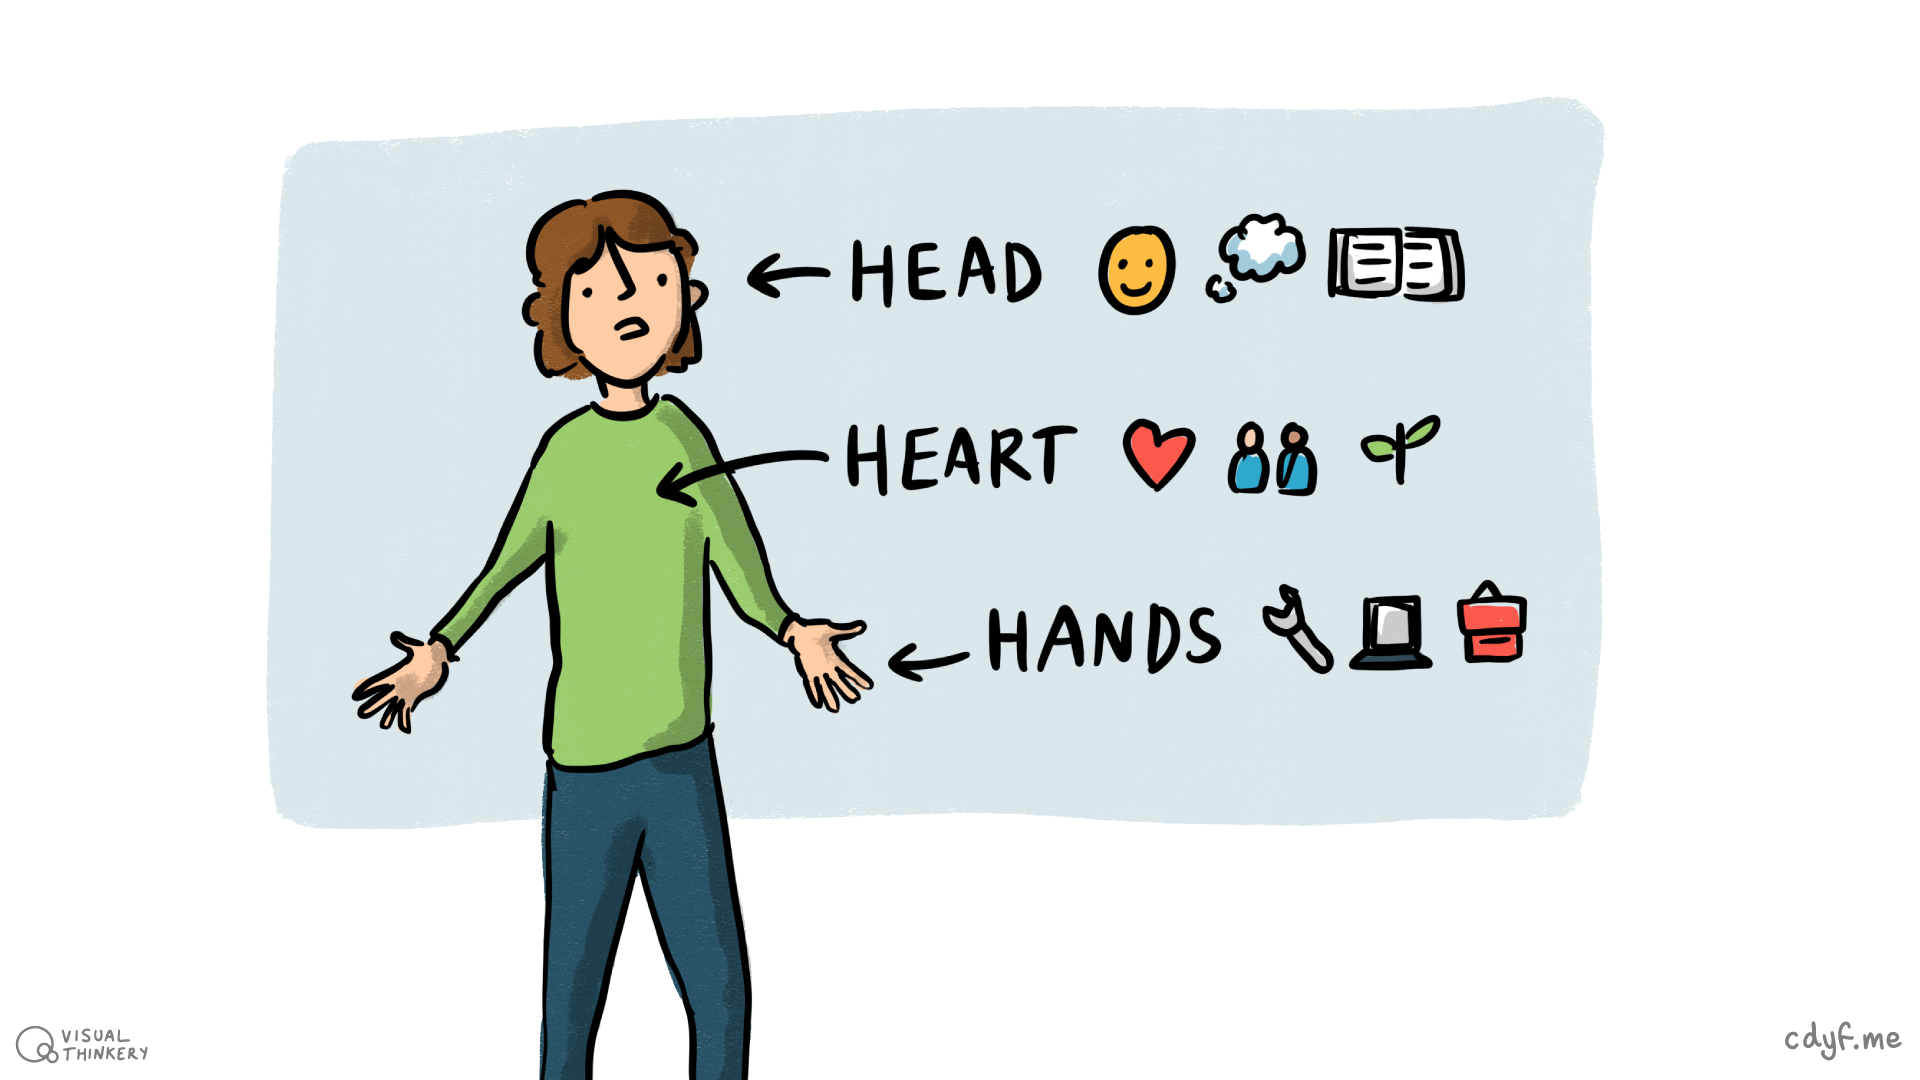 What knowledge do you have (head)? What are your values (heart)? What skills and experience do you have (hands)?